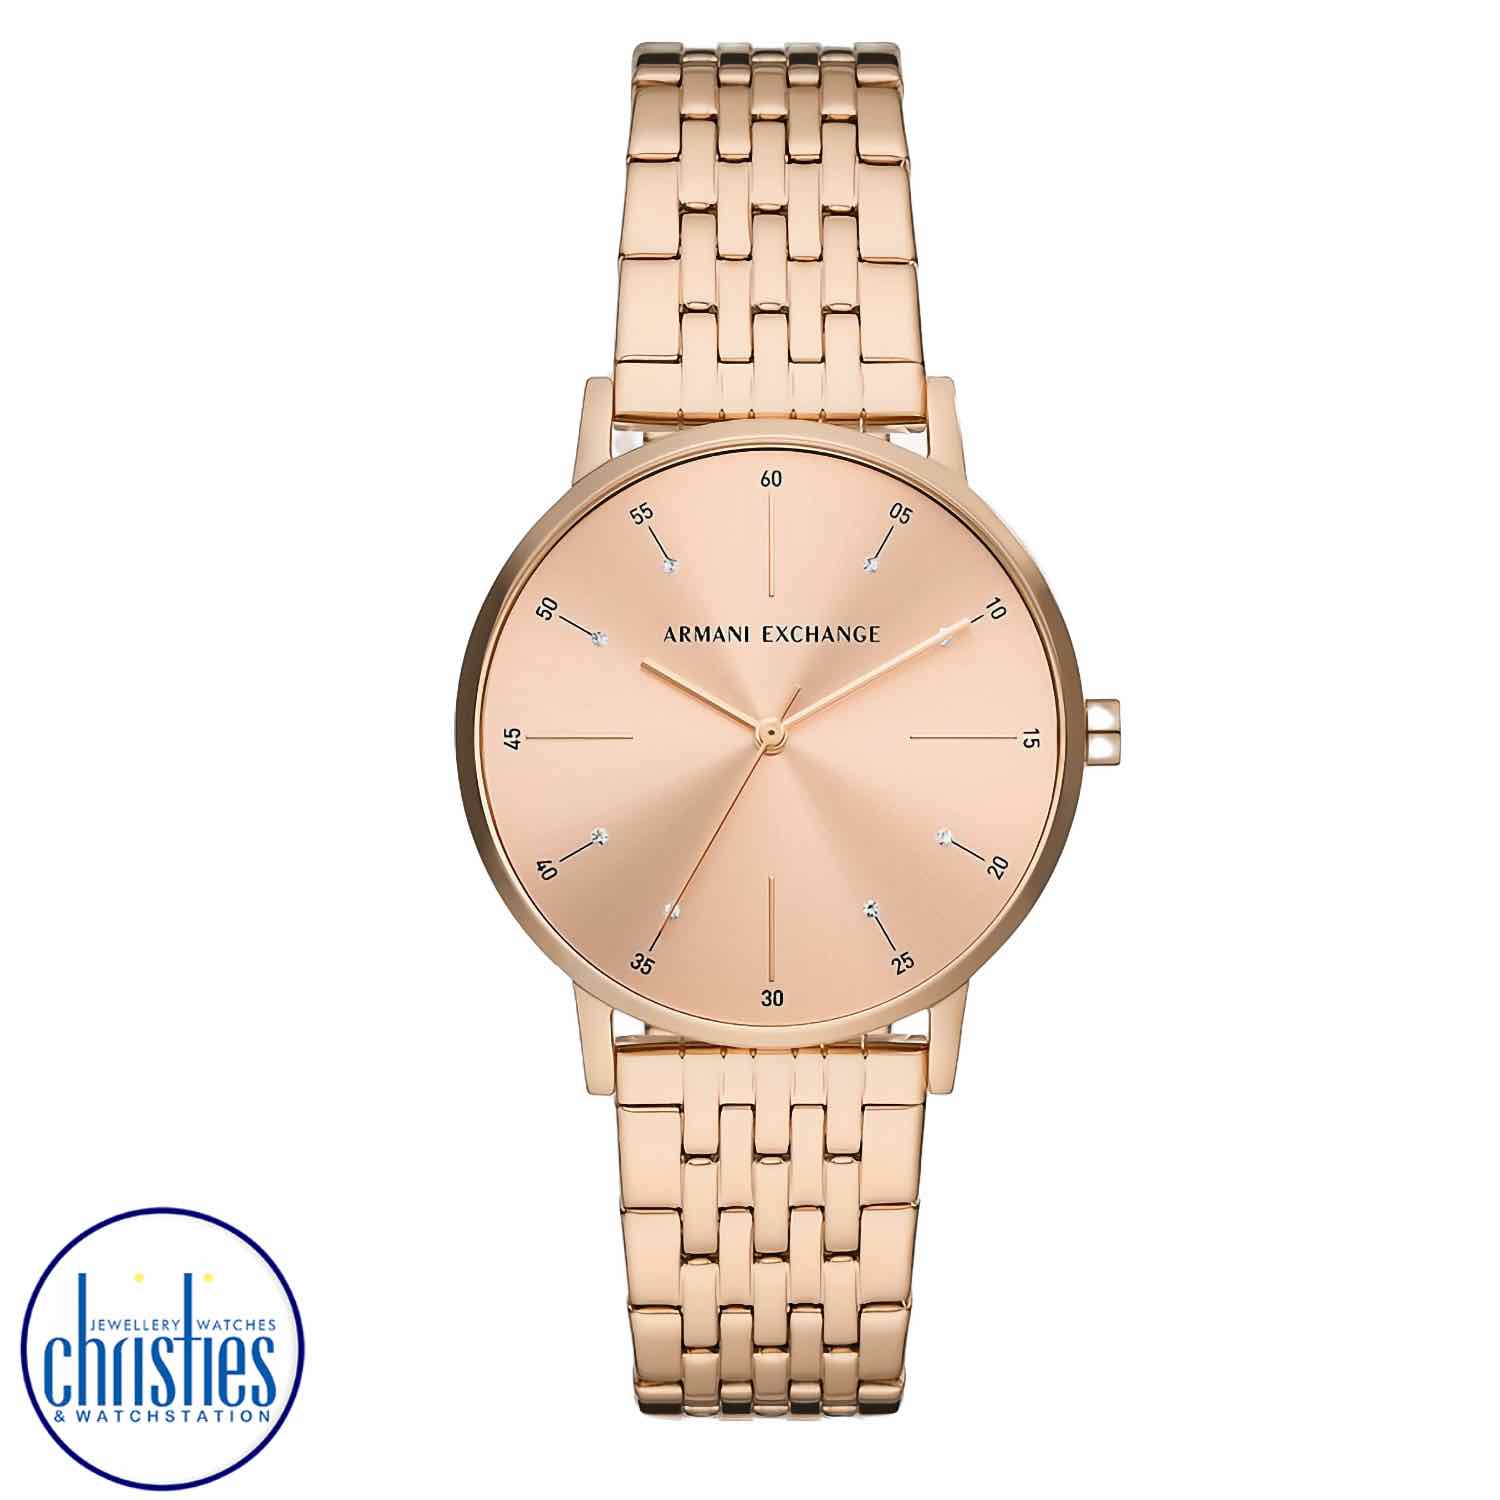 AX5581 A|X Armani Exchange Rose Gold Tone Watch. AX5581 A|X Armani Exchange Three-Hand Rose Gold Tone WatchAfterpay - Split your purchase into 4 instalments - Pay for your purchase over 4 instalments, due every two weeks.